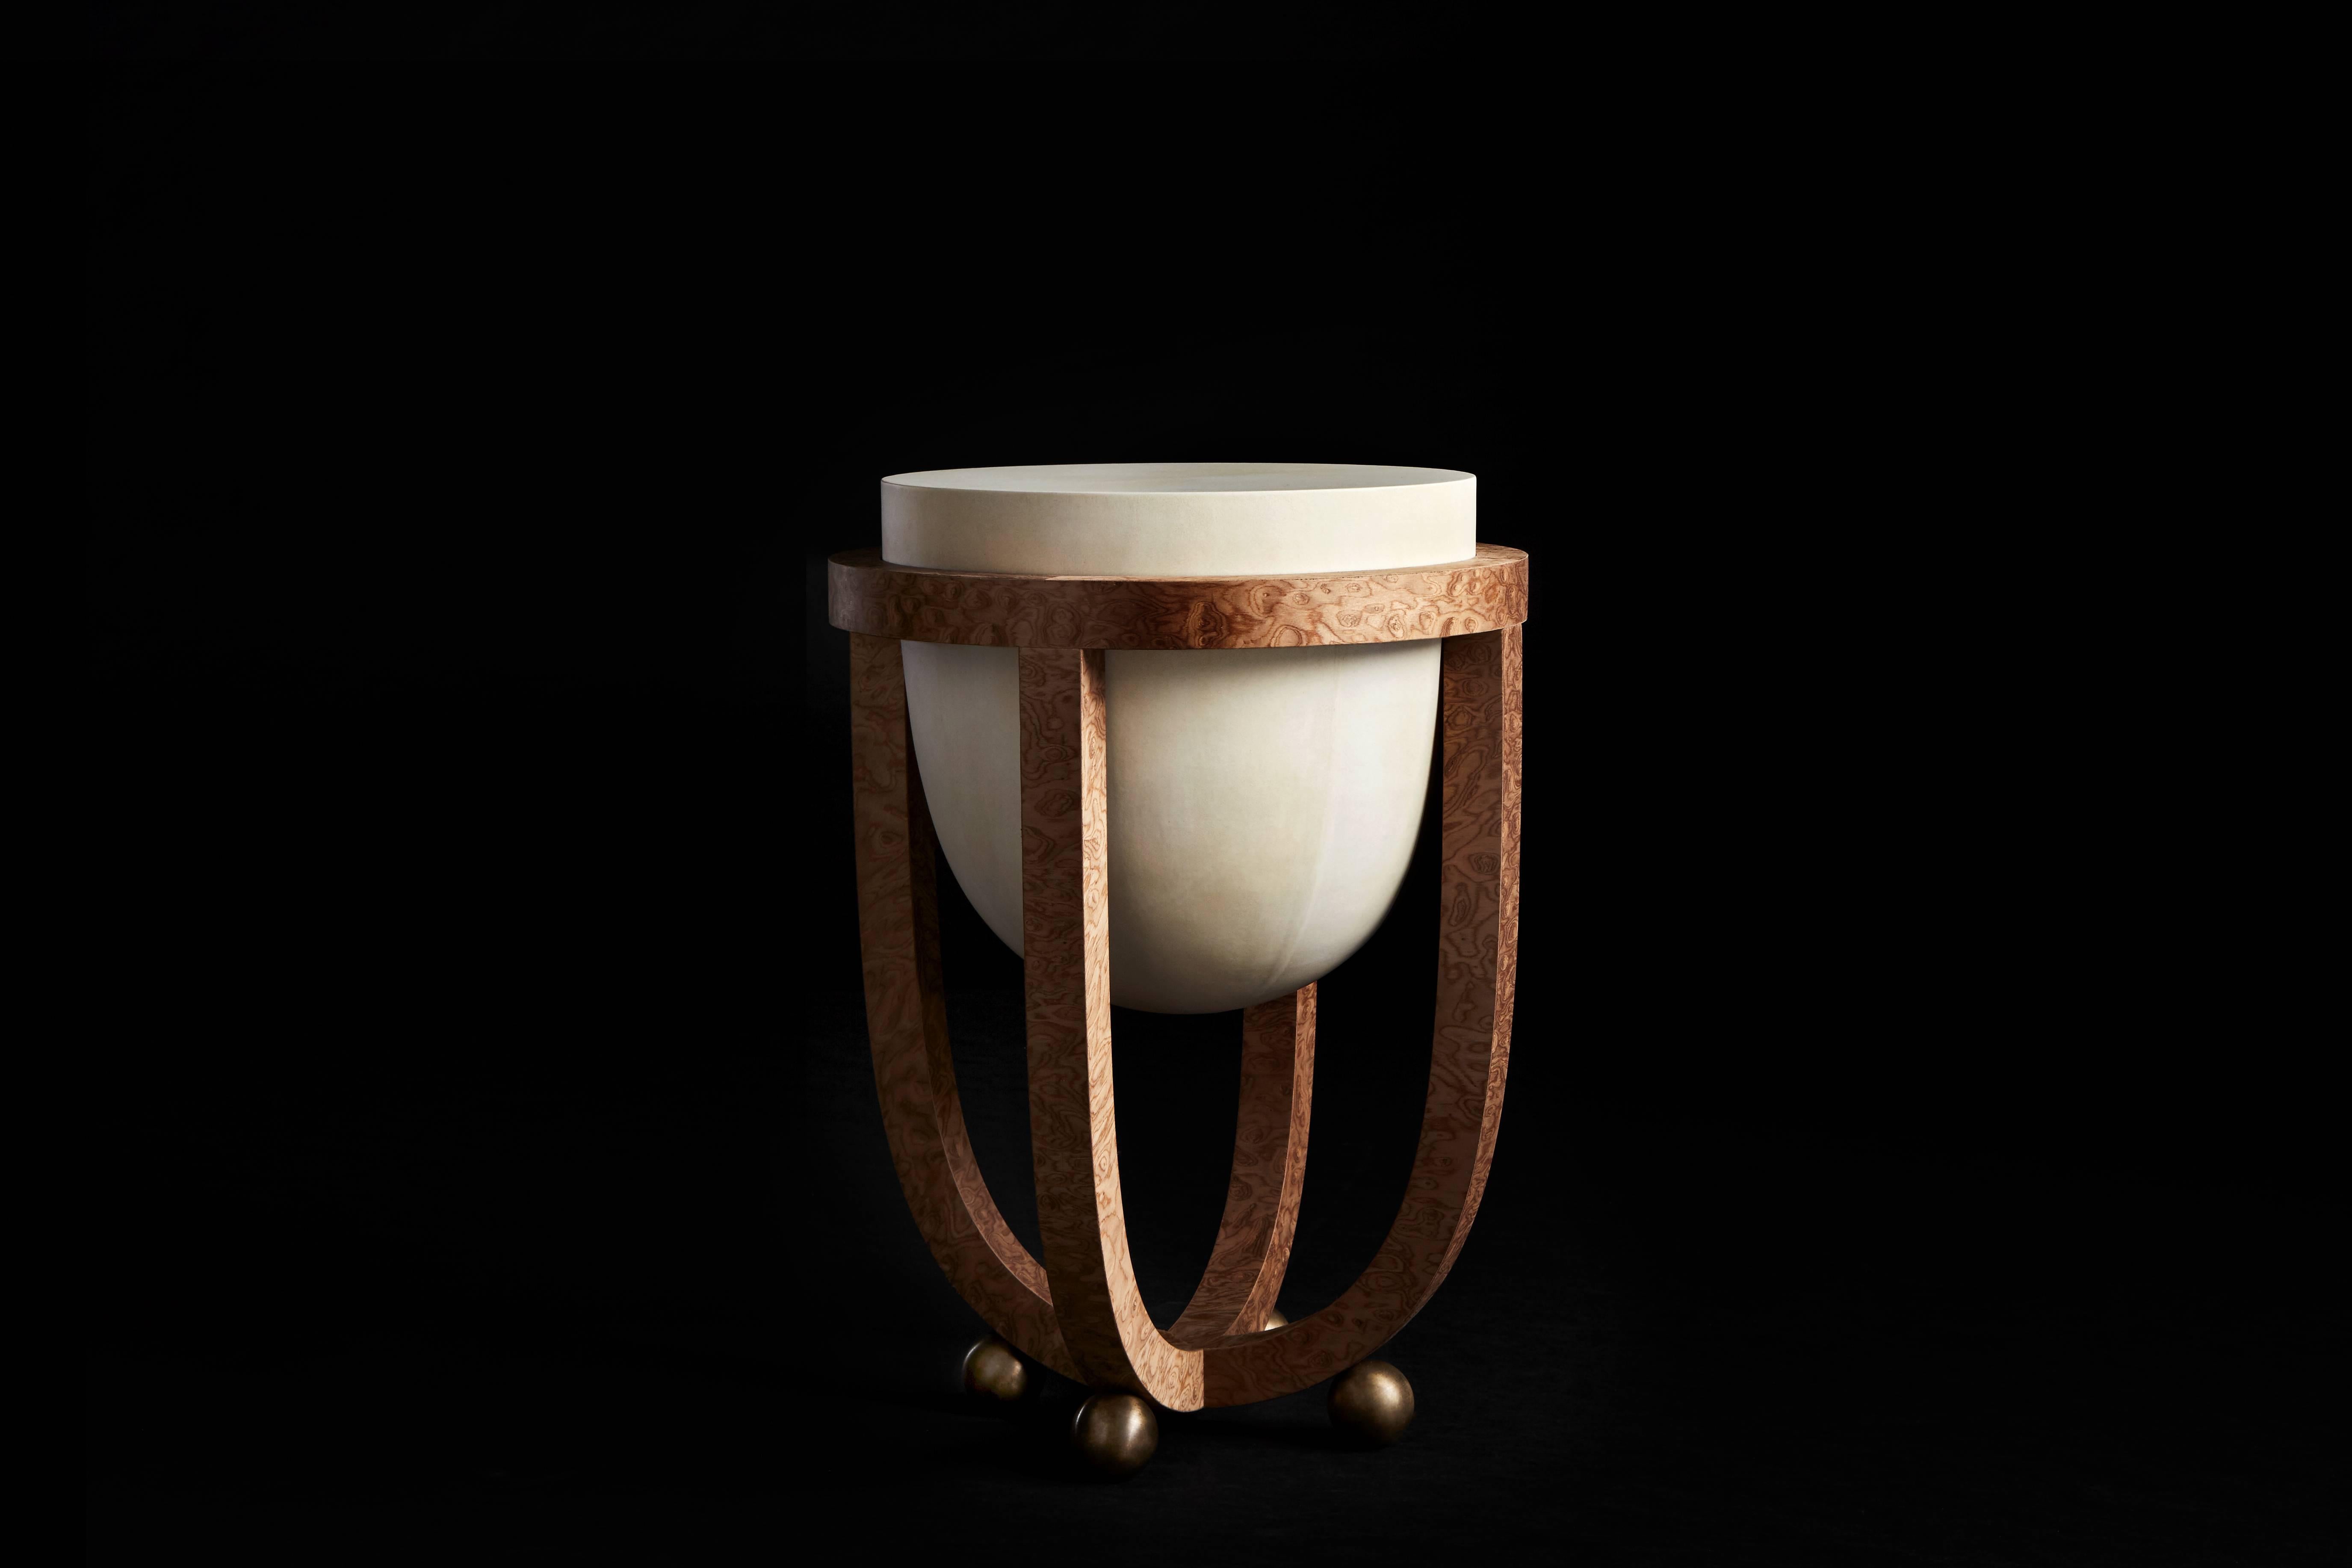 The Drum series references Tombak, a foundational instrument in Persian music, as a point of departure. Parchment is hand-stretched over the table surface, and the veneered legs curve to echo the shape of the suspended parchment volume. 

Natural